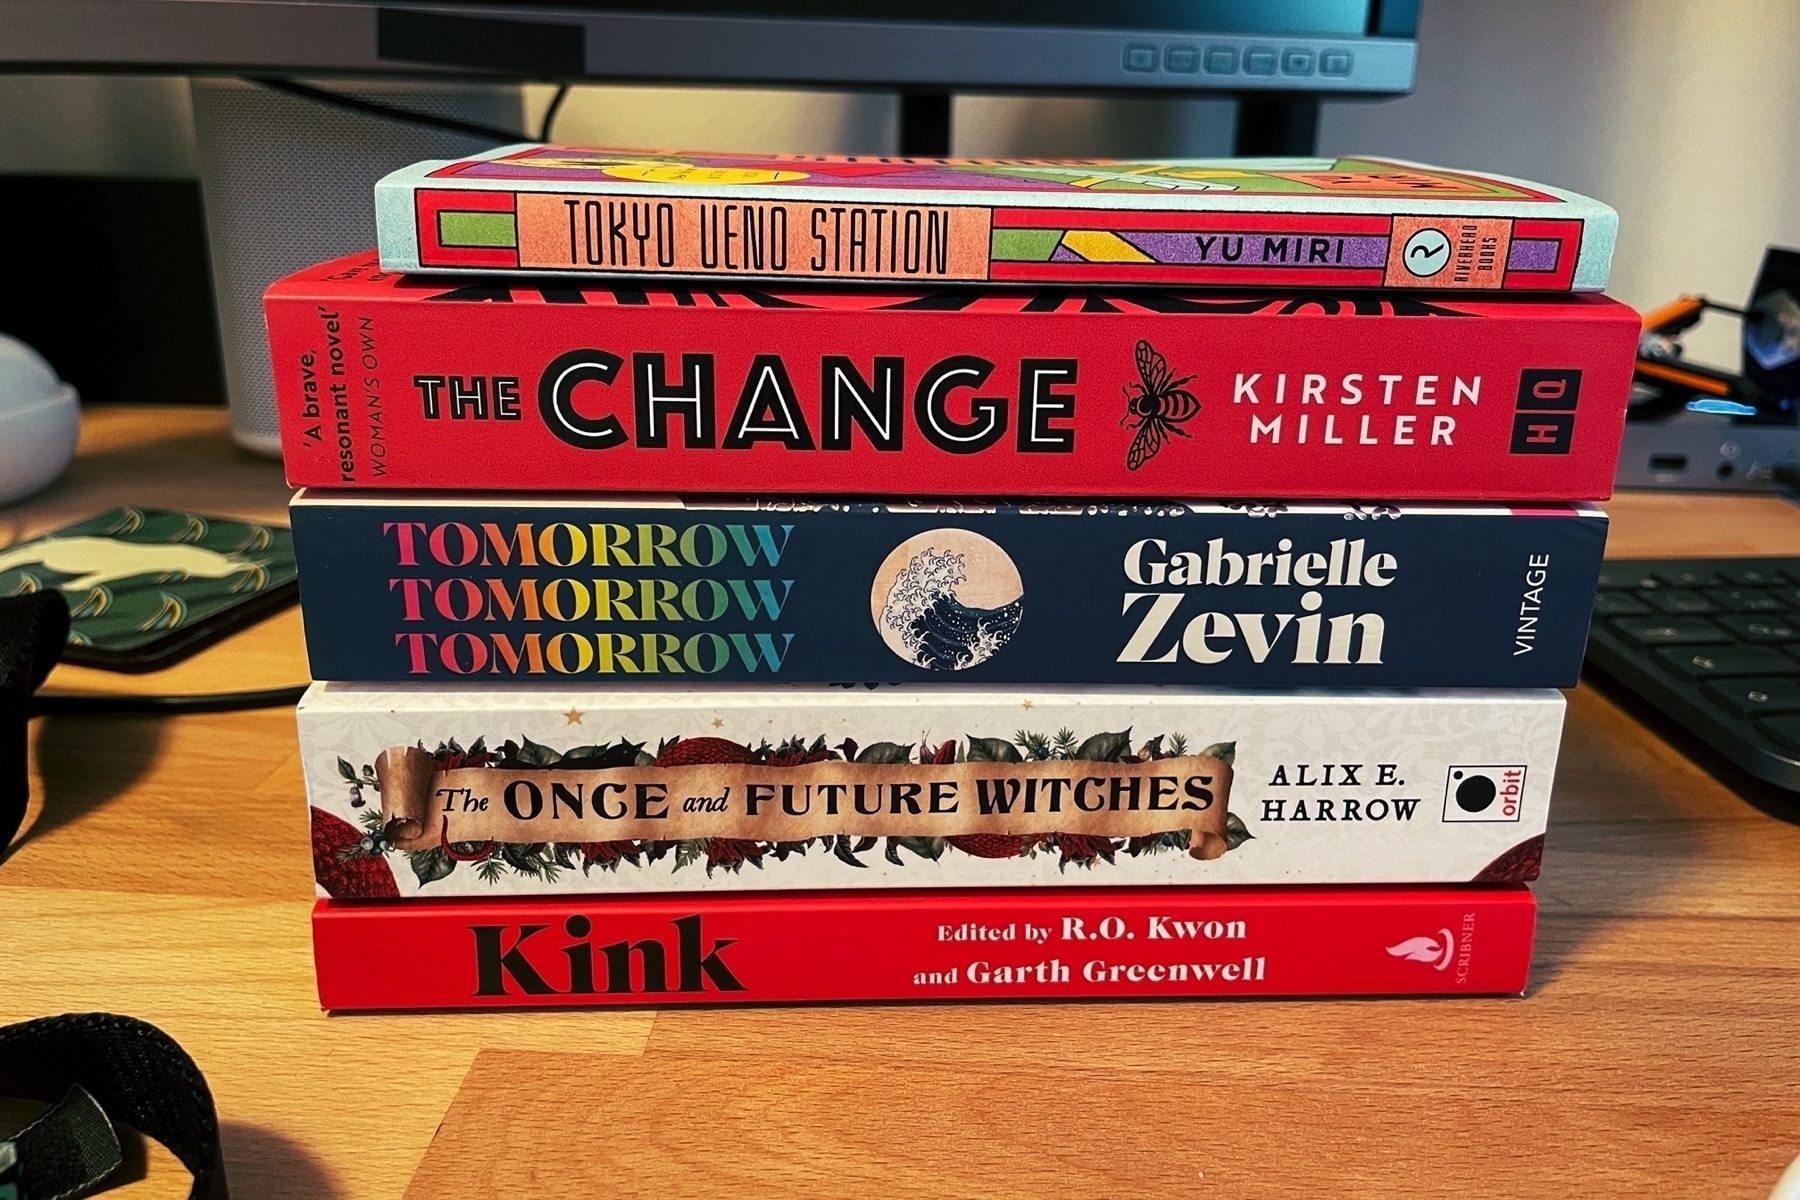 Stack of books on a desk: Kink, The Once and Future Witches, Tomorrow Tomorrow Tomorrow, The Change, and Tokyo Ueno Station.